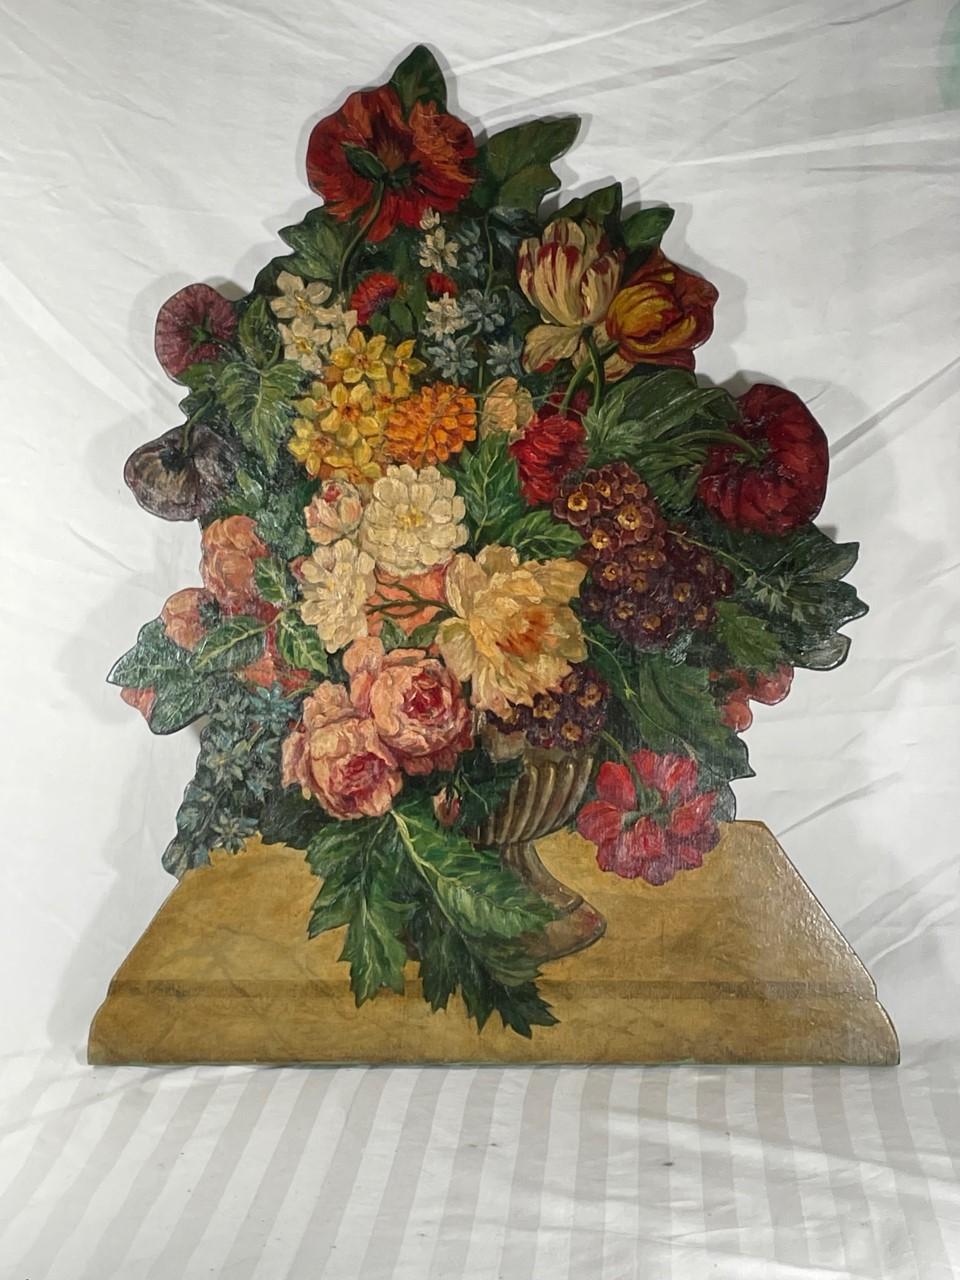 Antique Englishpainted wood firescreen flower basket dummy board

During the 18th and 19th centuries, dummy board fire screens were highly fashionable, especially among the English. This decorative flower basket from the turn of the century is very